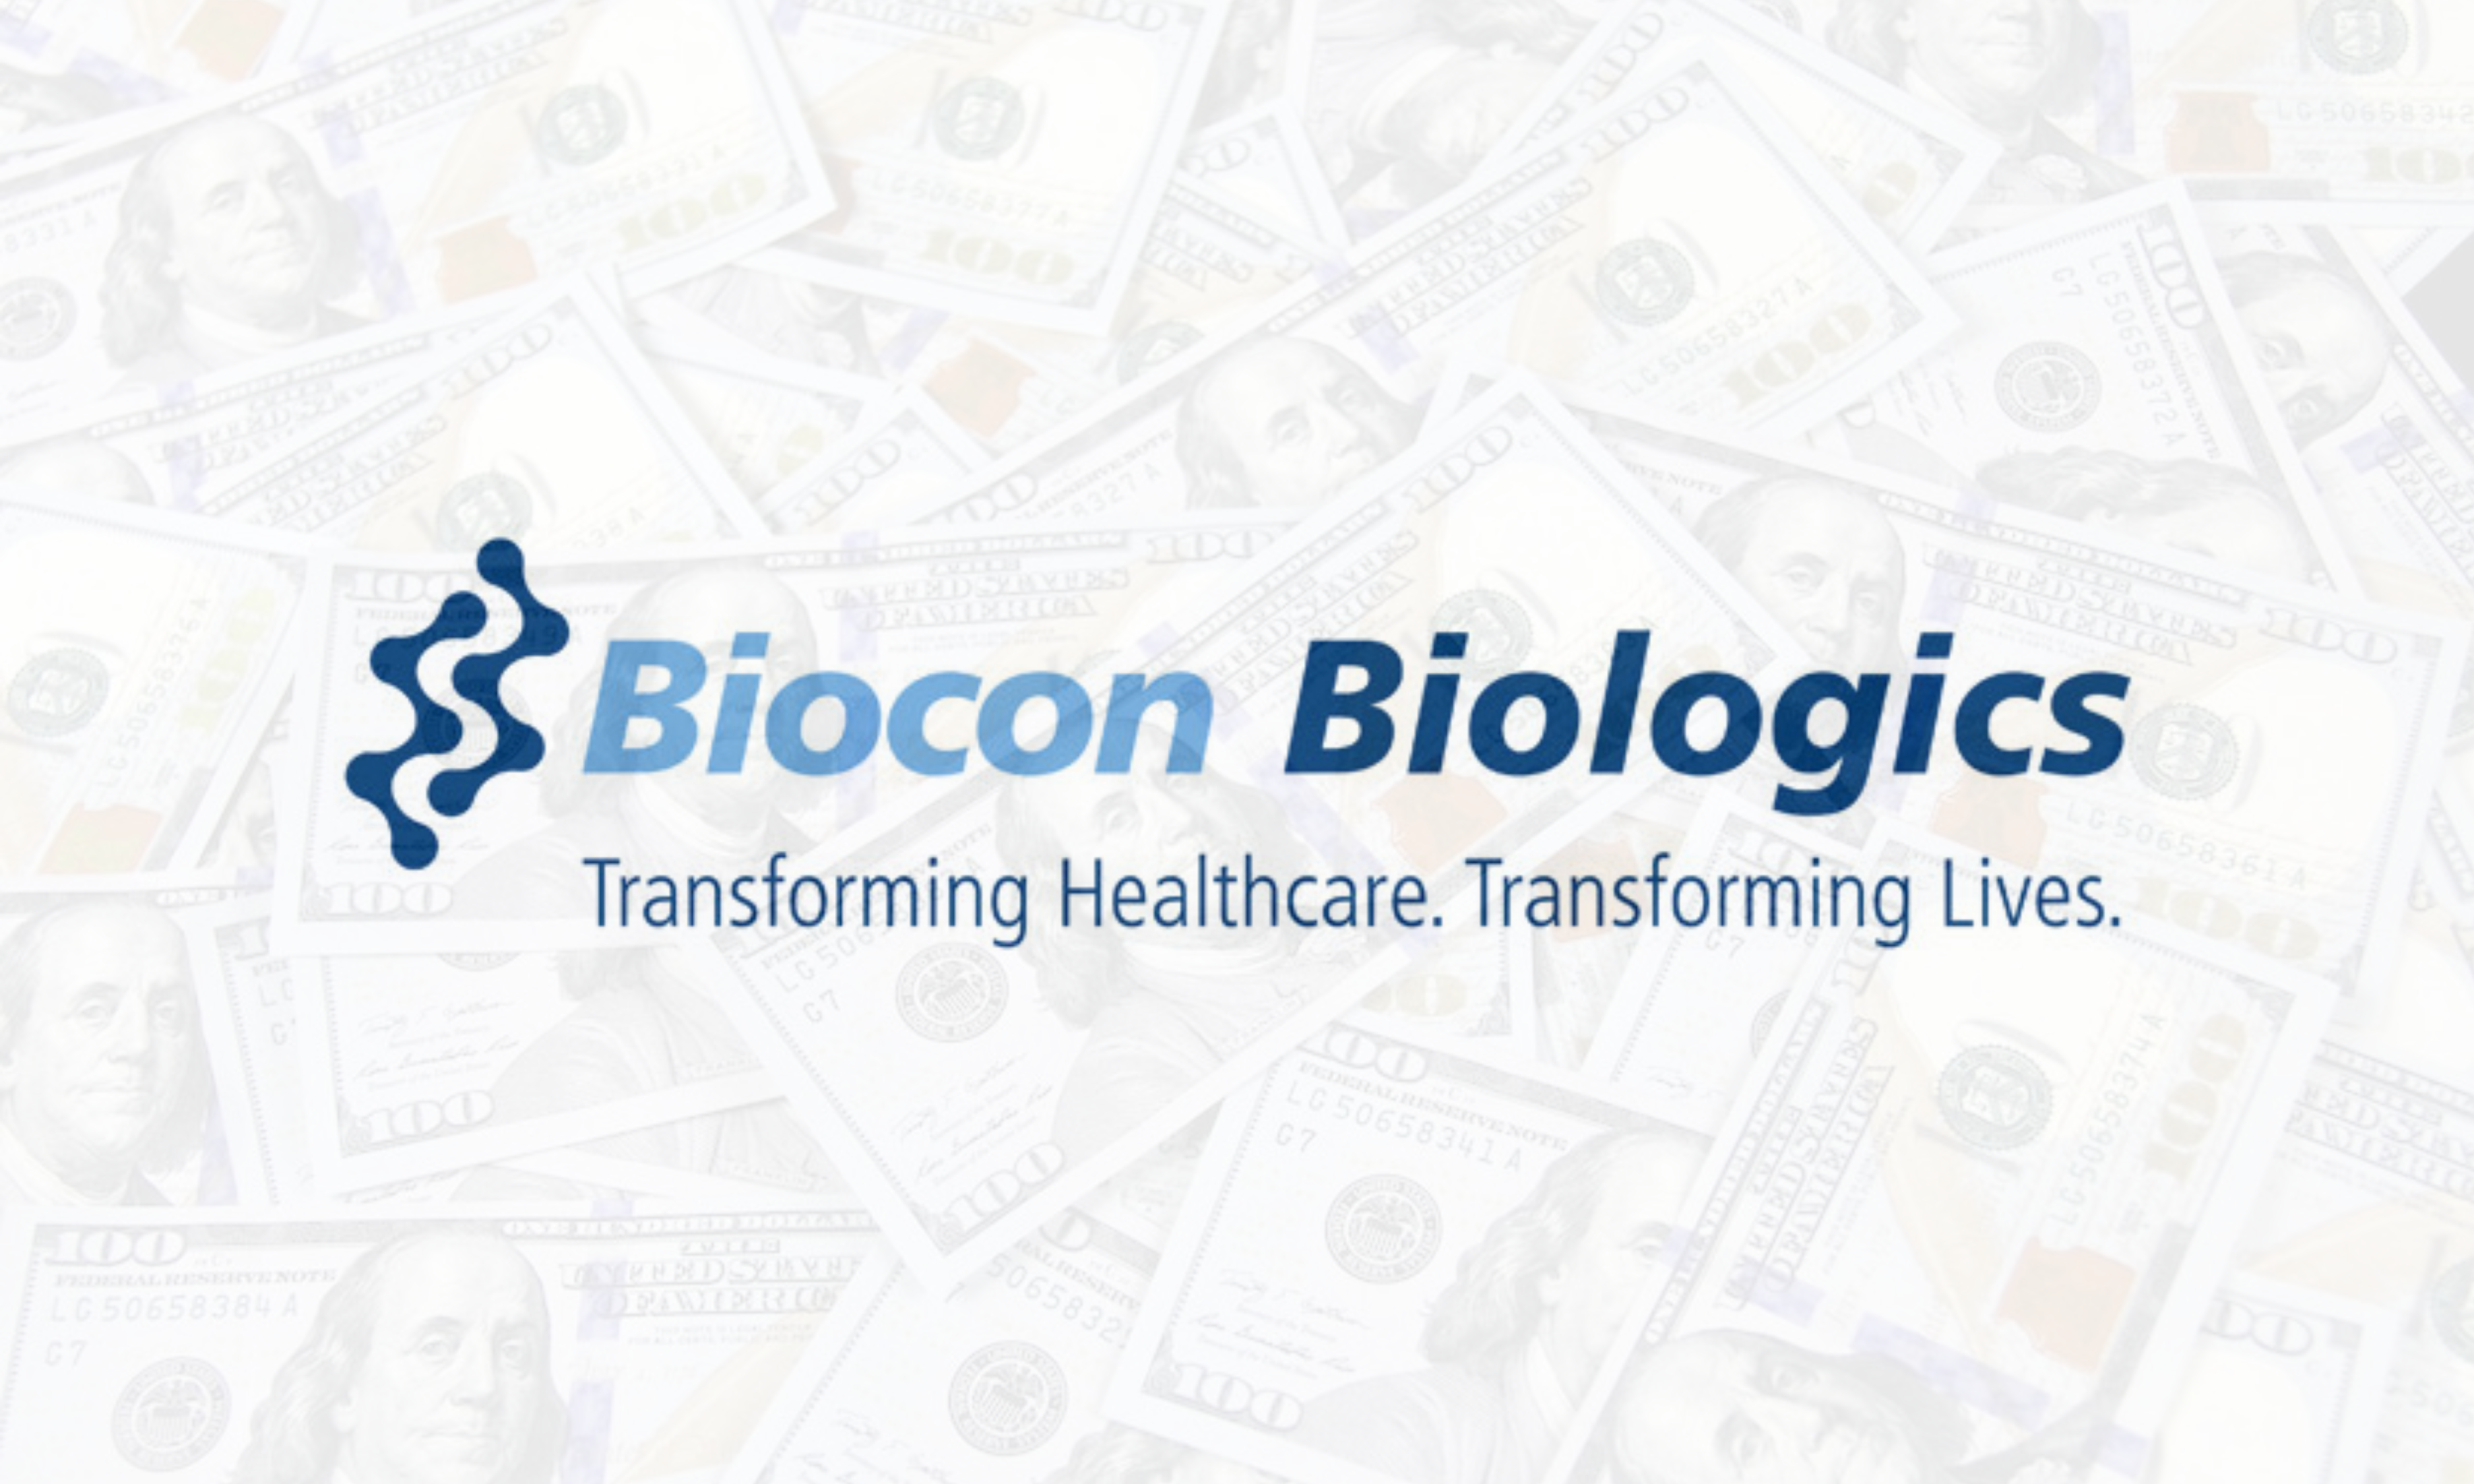 Biocon Biologics logo with a picture of $100 bills over it